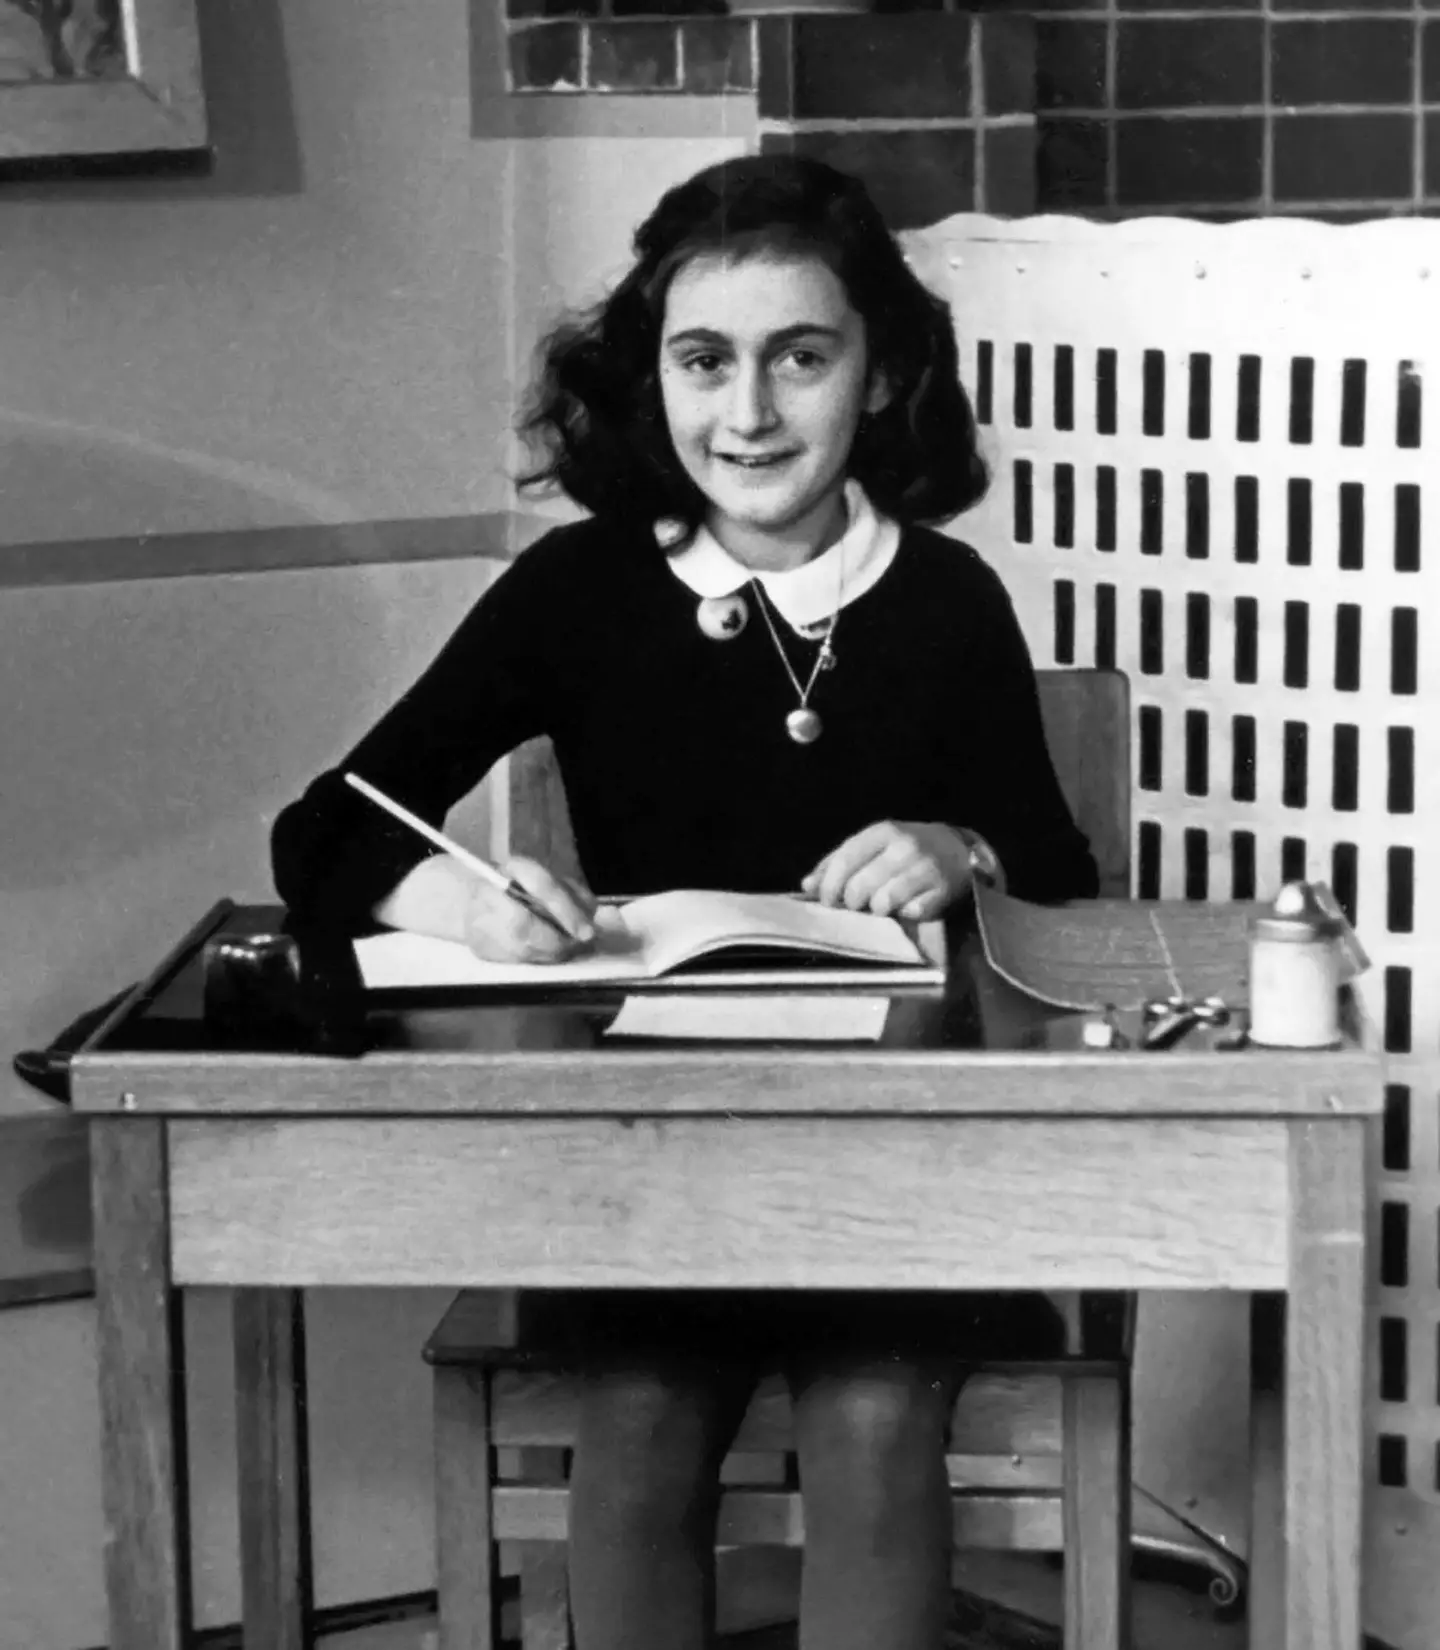 Anne Frank wrote about her daily life while in hiding.